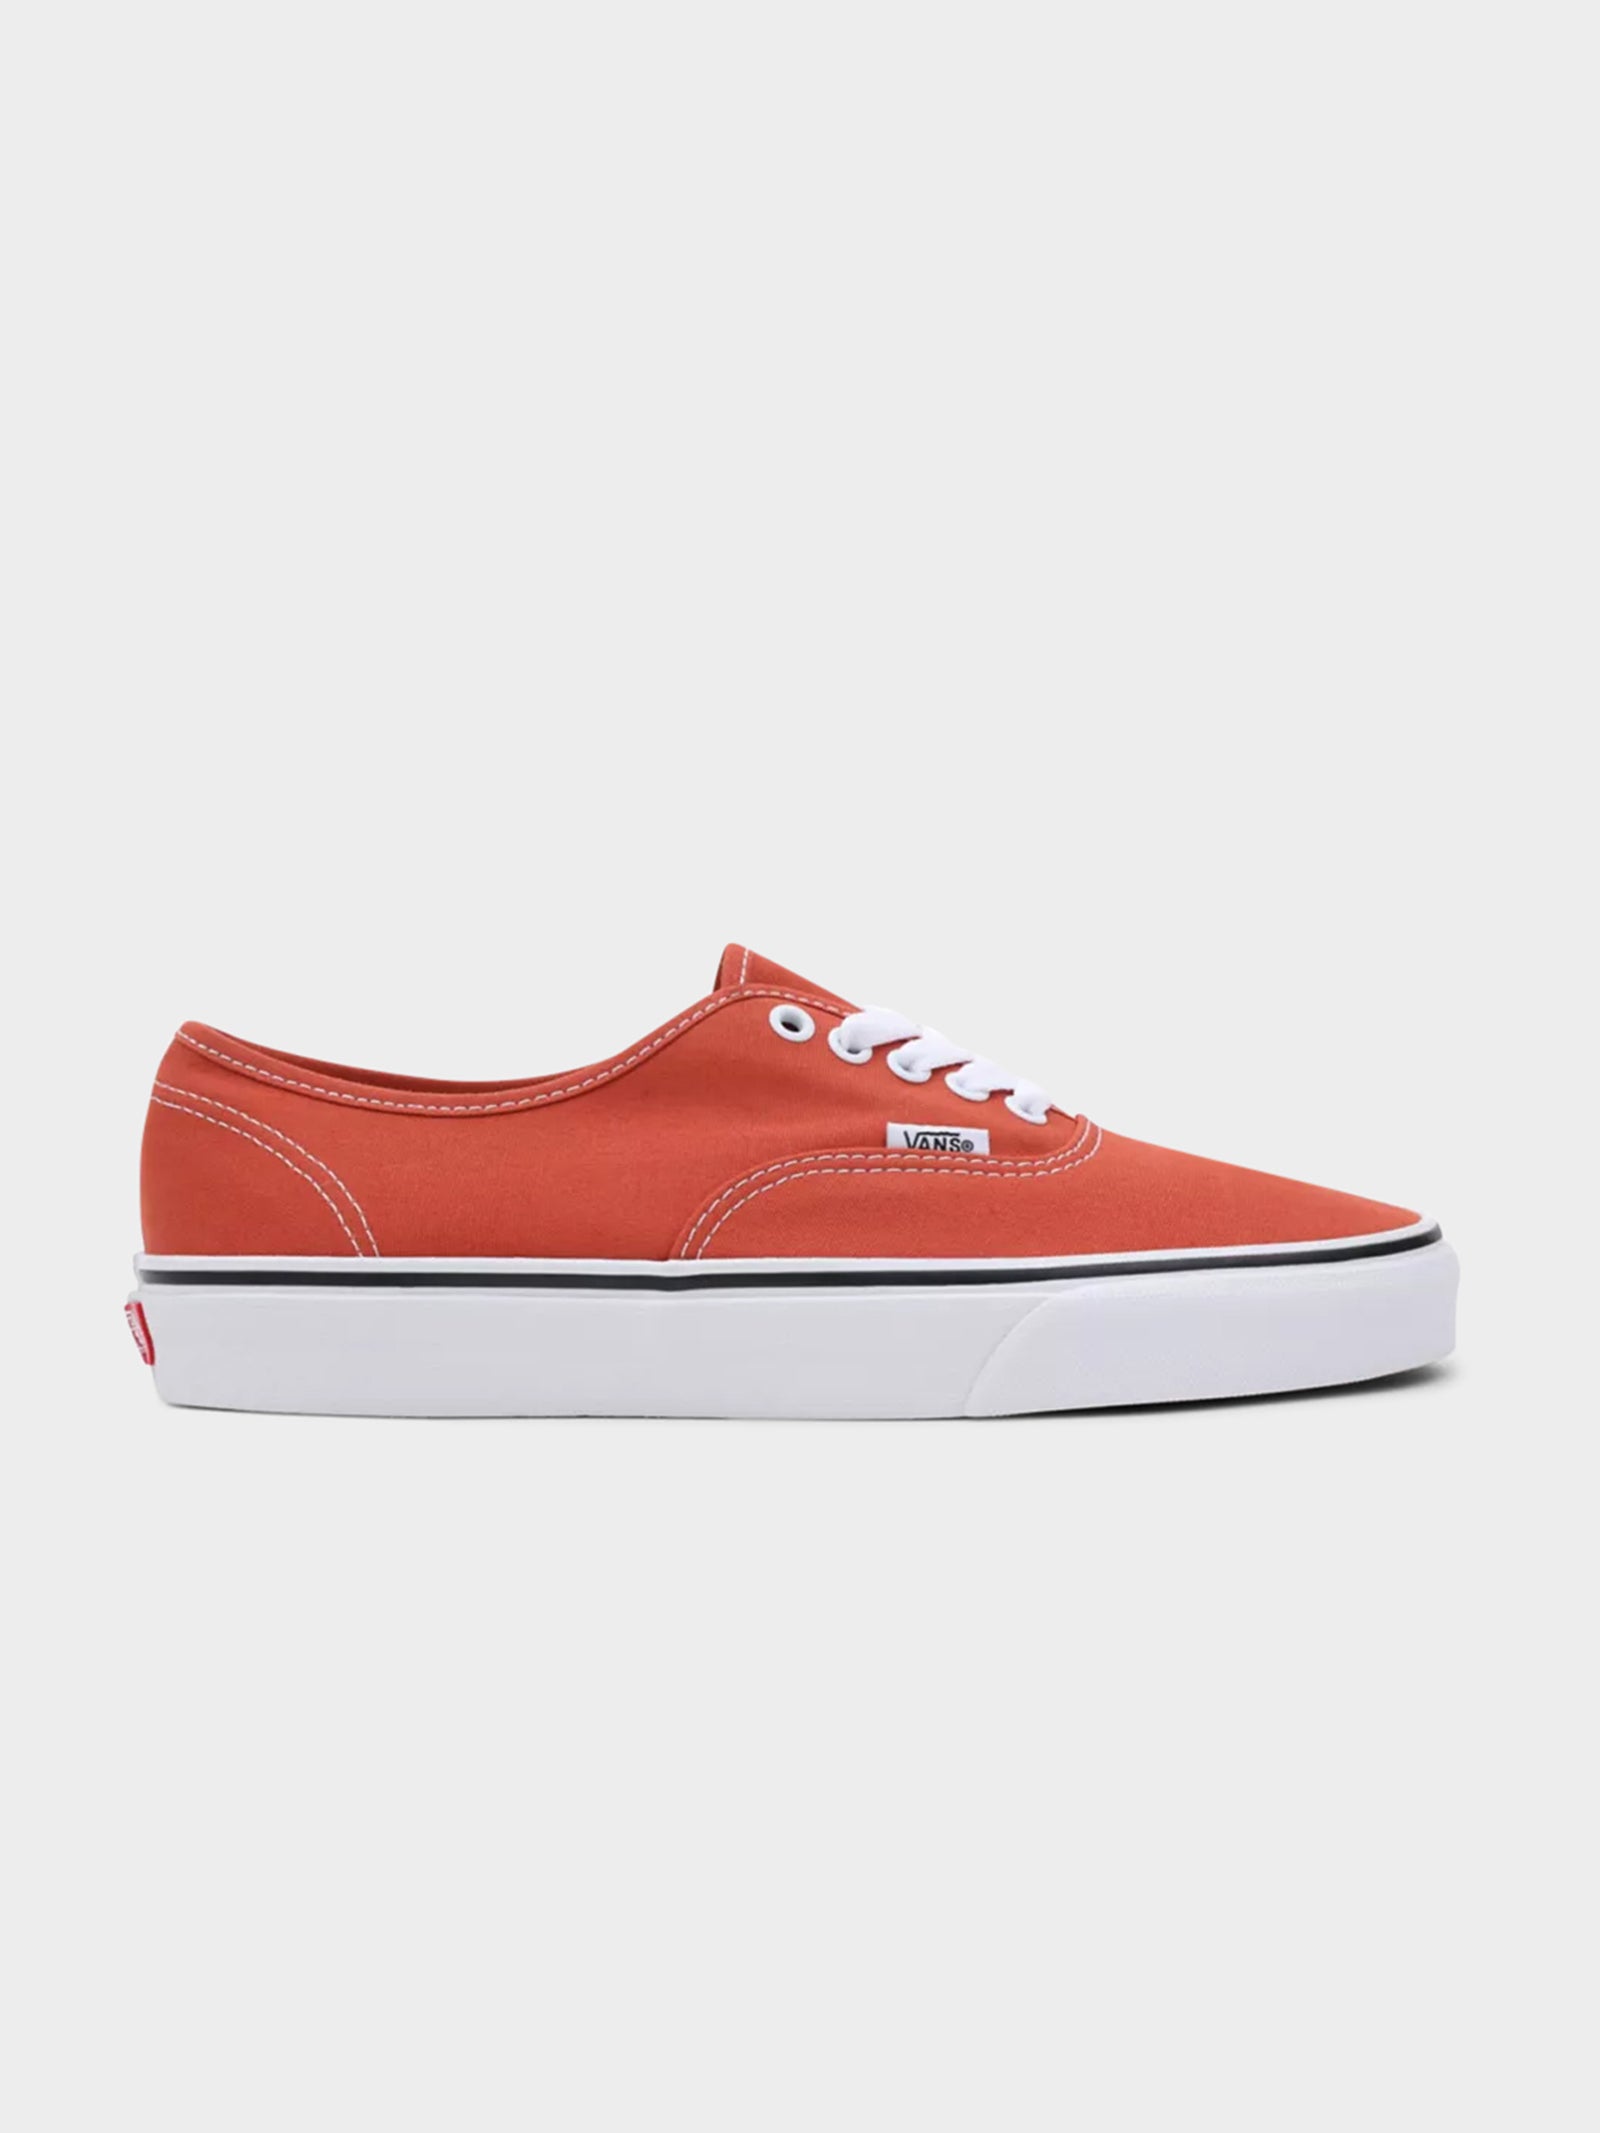 Unisex Authentic Color Theory Sneakers in Coral